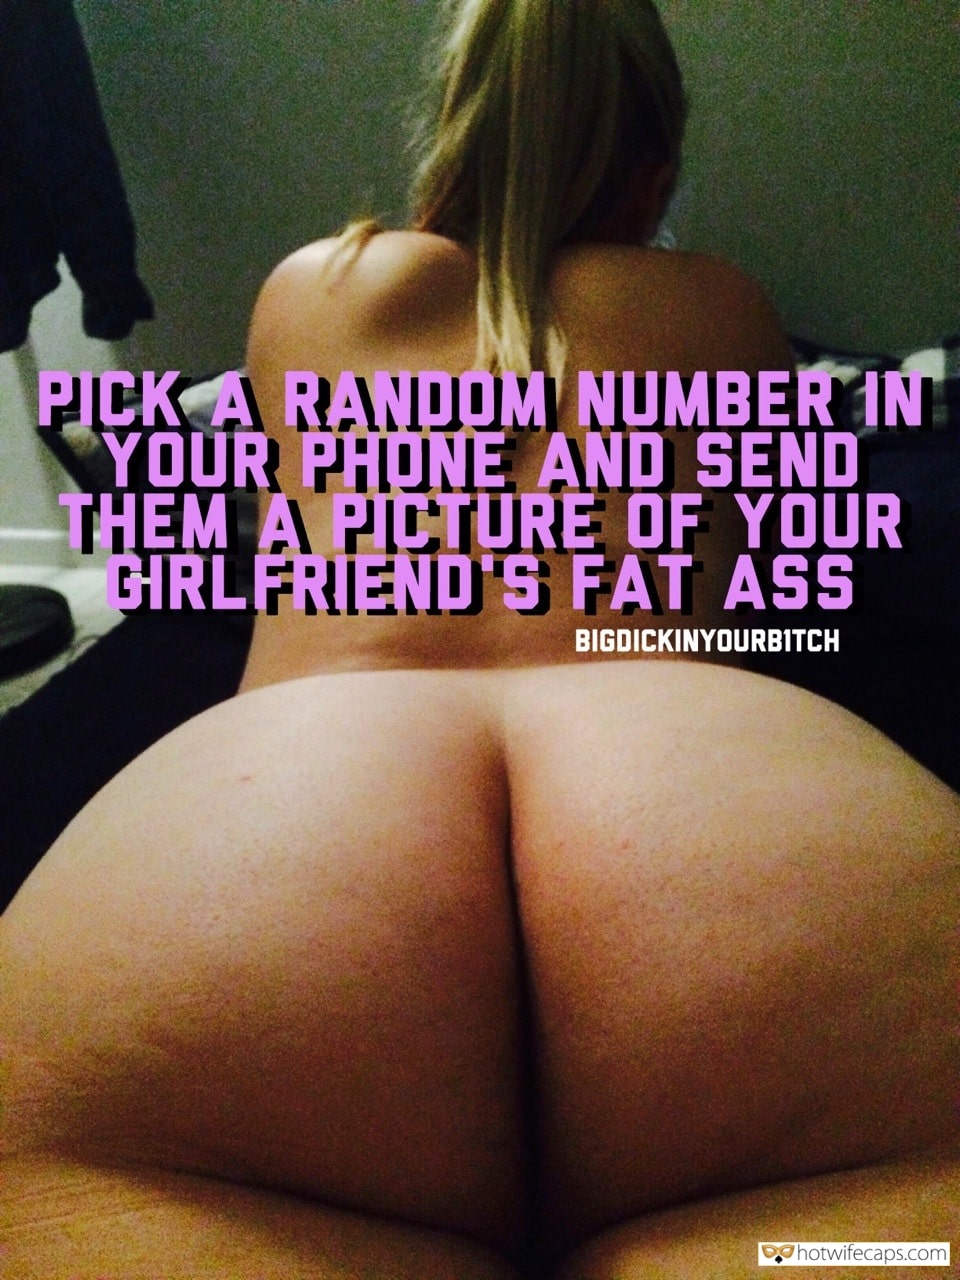 My Favorite hotwife caption: PICK A RANDOM NUMBER IN YOUR PHONE AND SEND THEM A PICTURE OF YOUR GIRLFRIEND S FAT ASS BIGDICKINYOURBITCH My Boss Recived This Pic